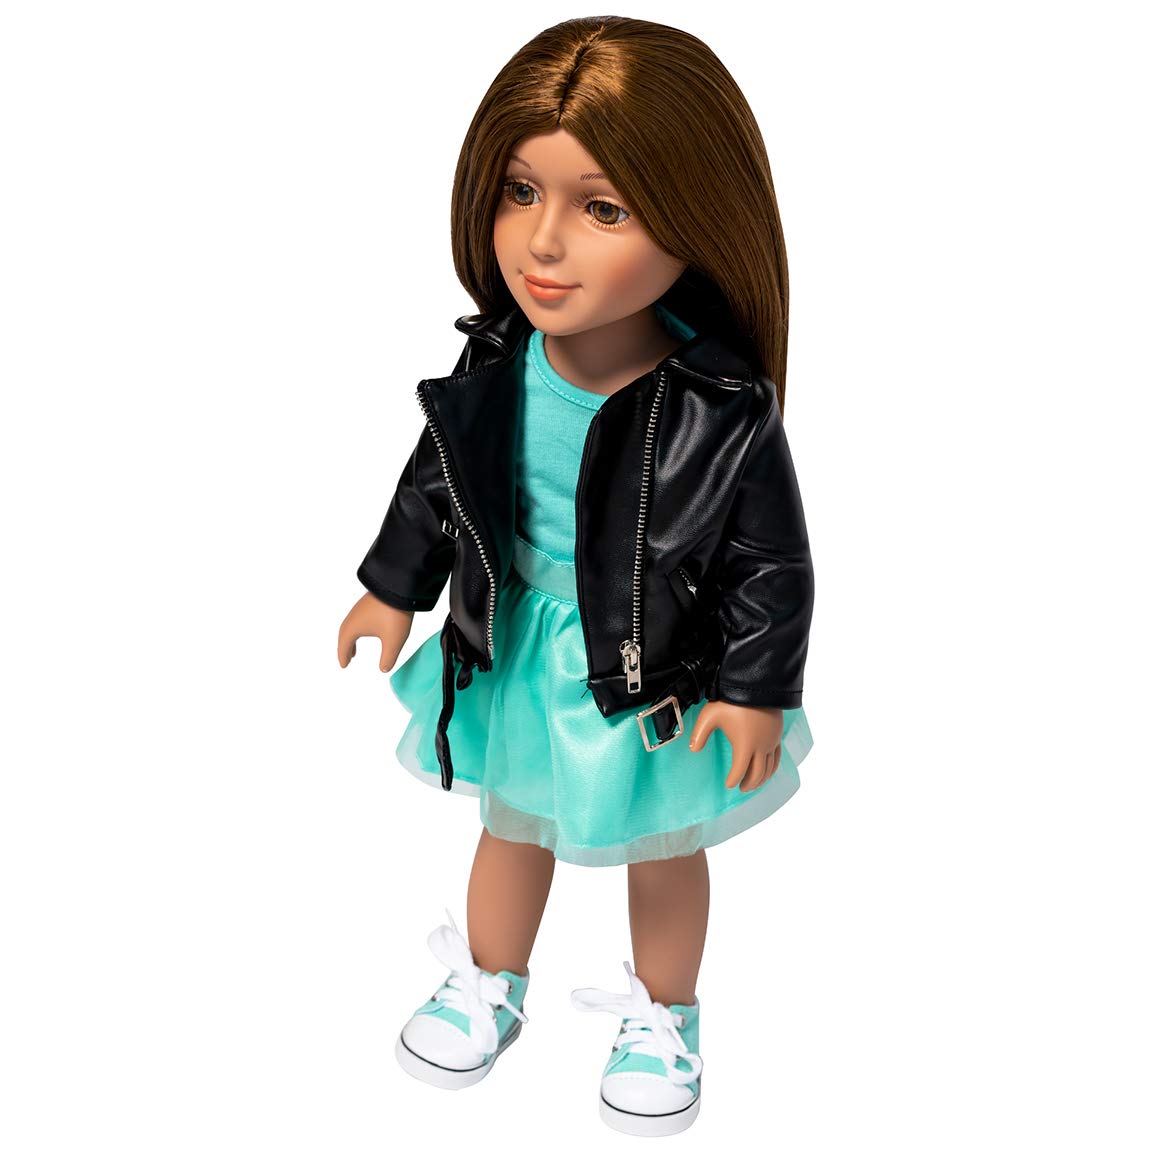 I'm A Girly Fashion Doll Lucy w/Brown Interchangeable Removable Synthetic Wig to Style - Fashionista Model Figure for Kids 8+ Years - 18